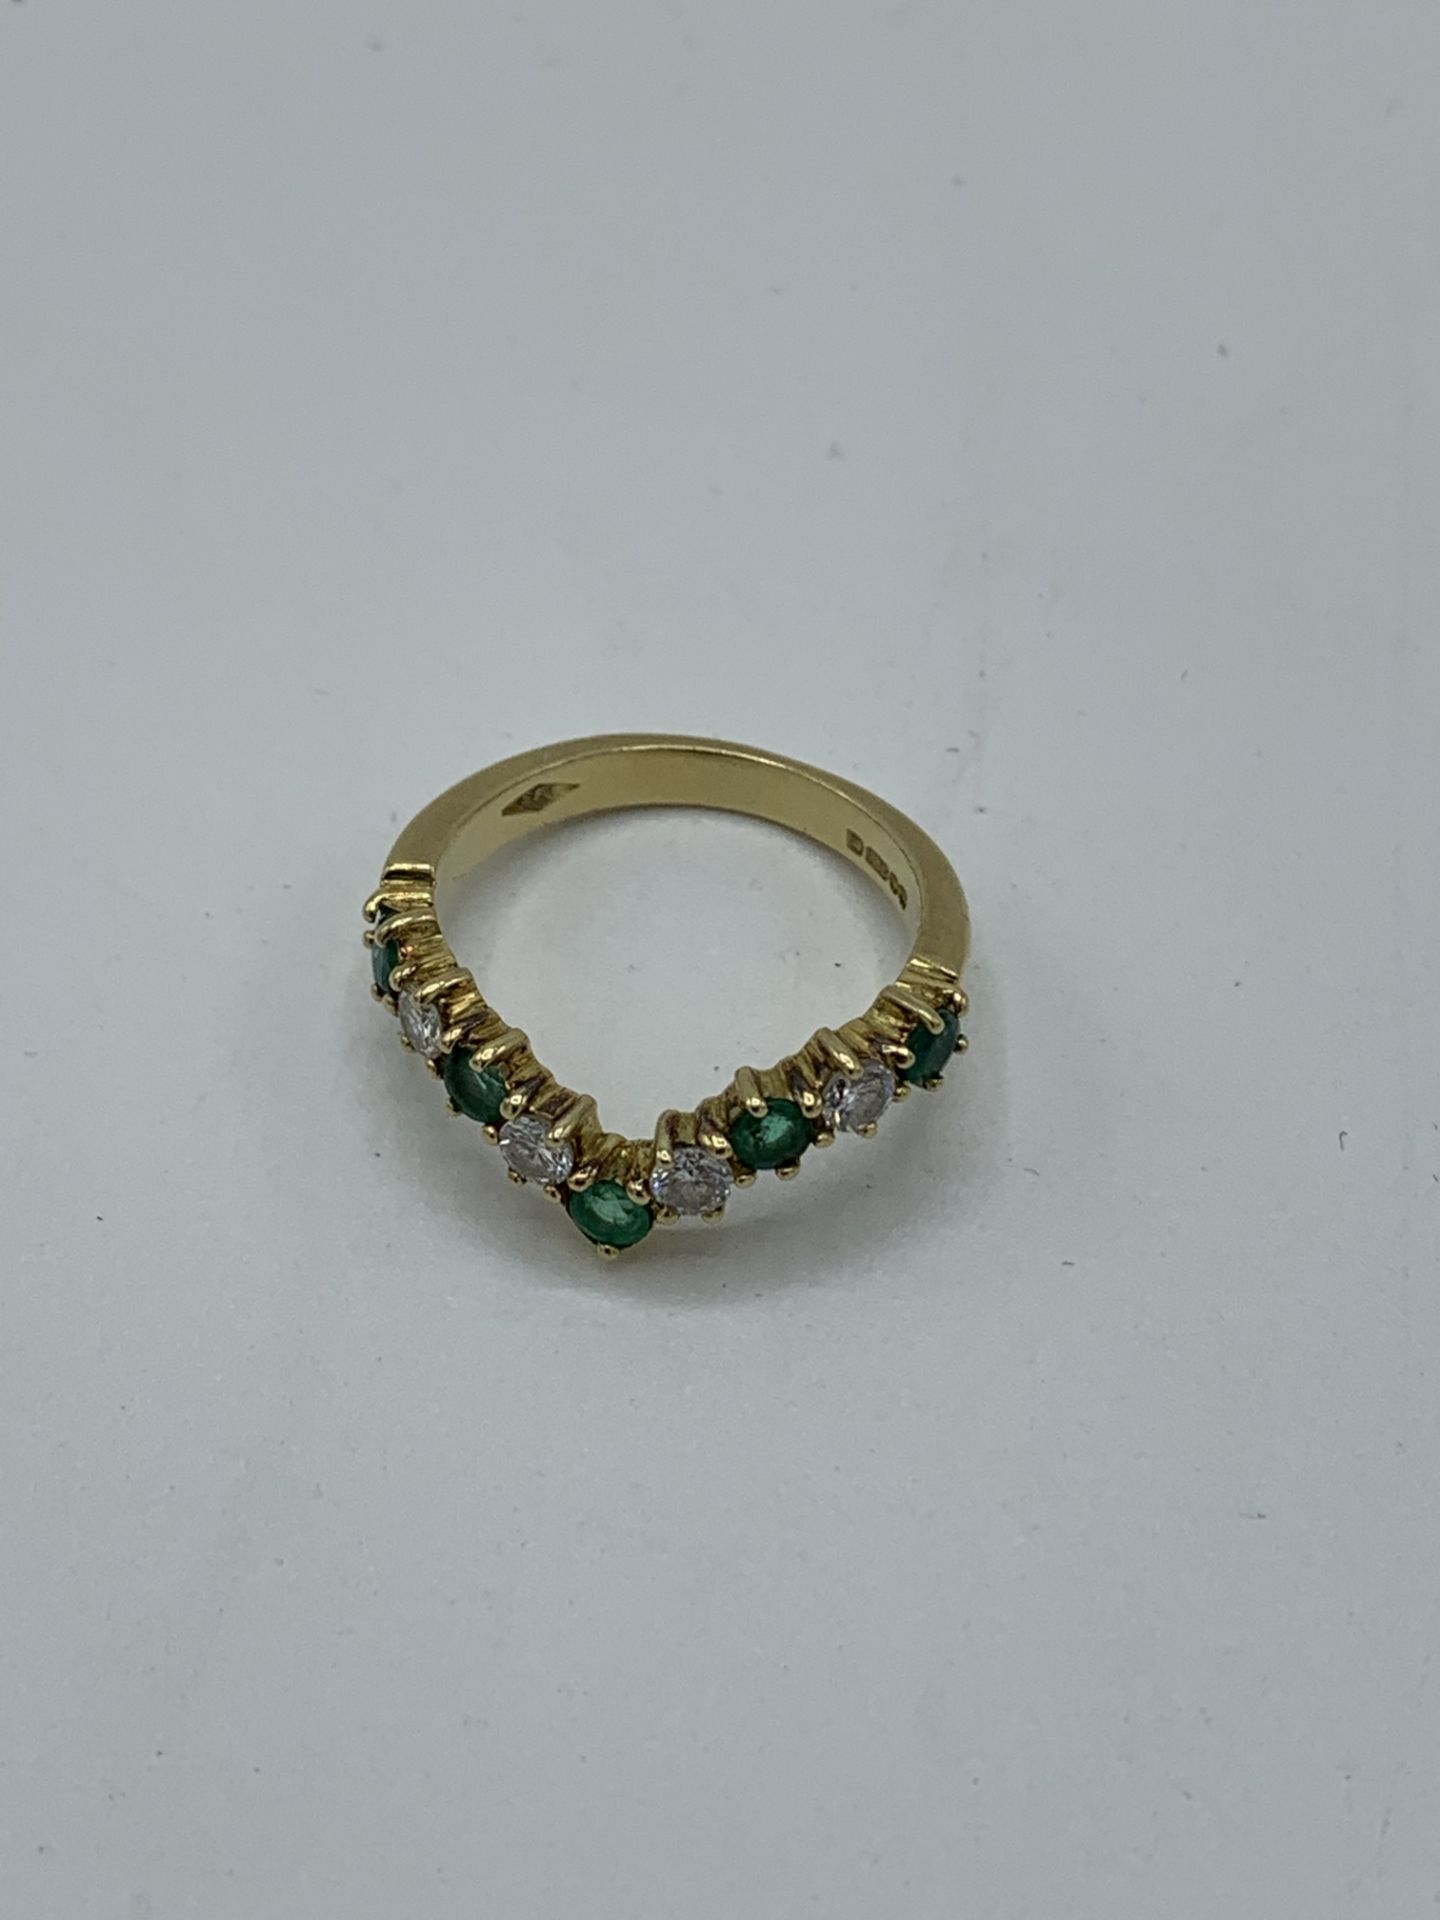 18ct gold diamond and emerald ring size I, weight 2.9gms. Estimate £150-180.